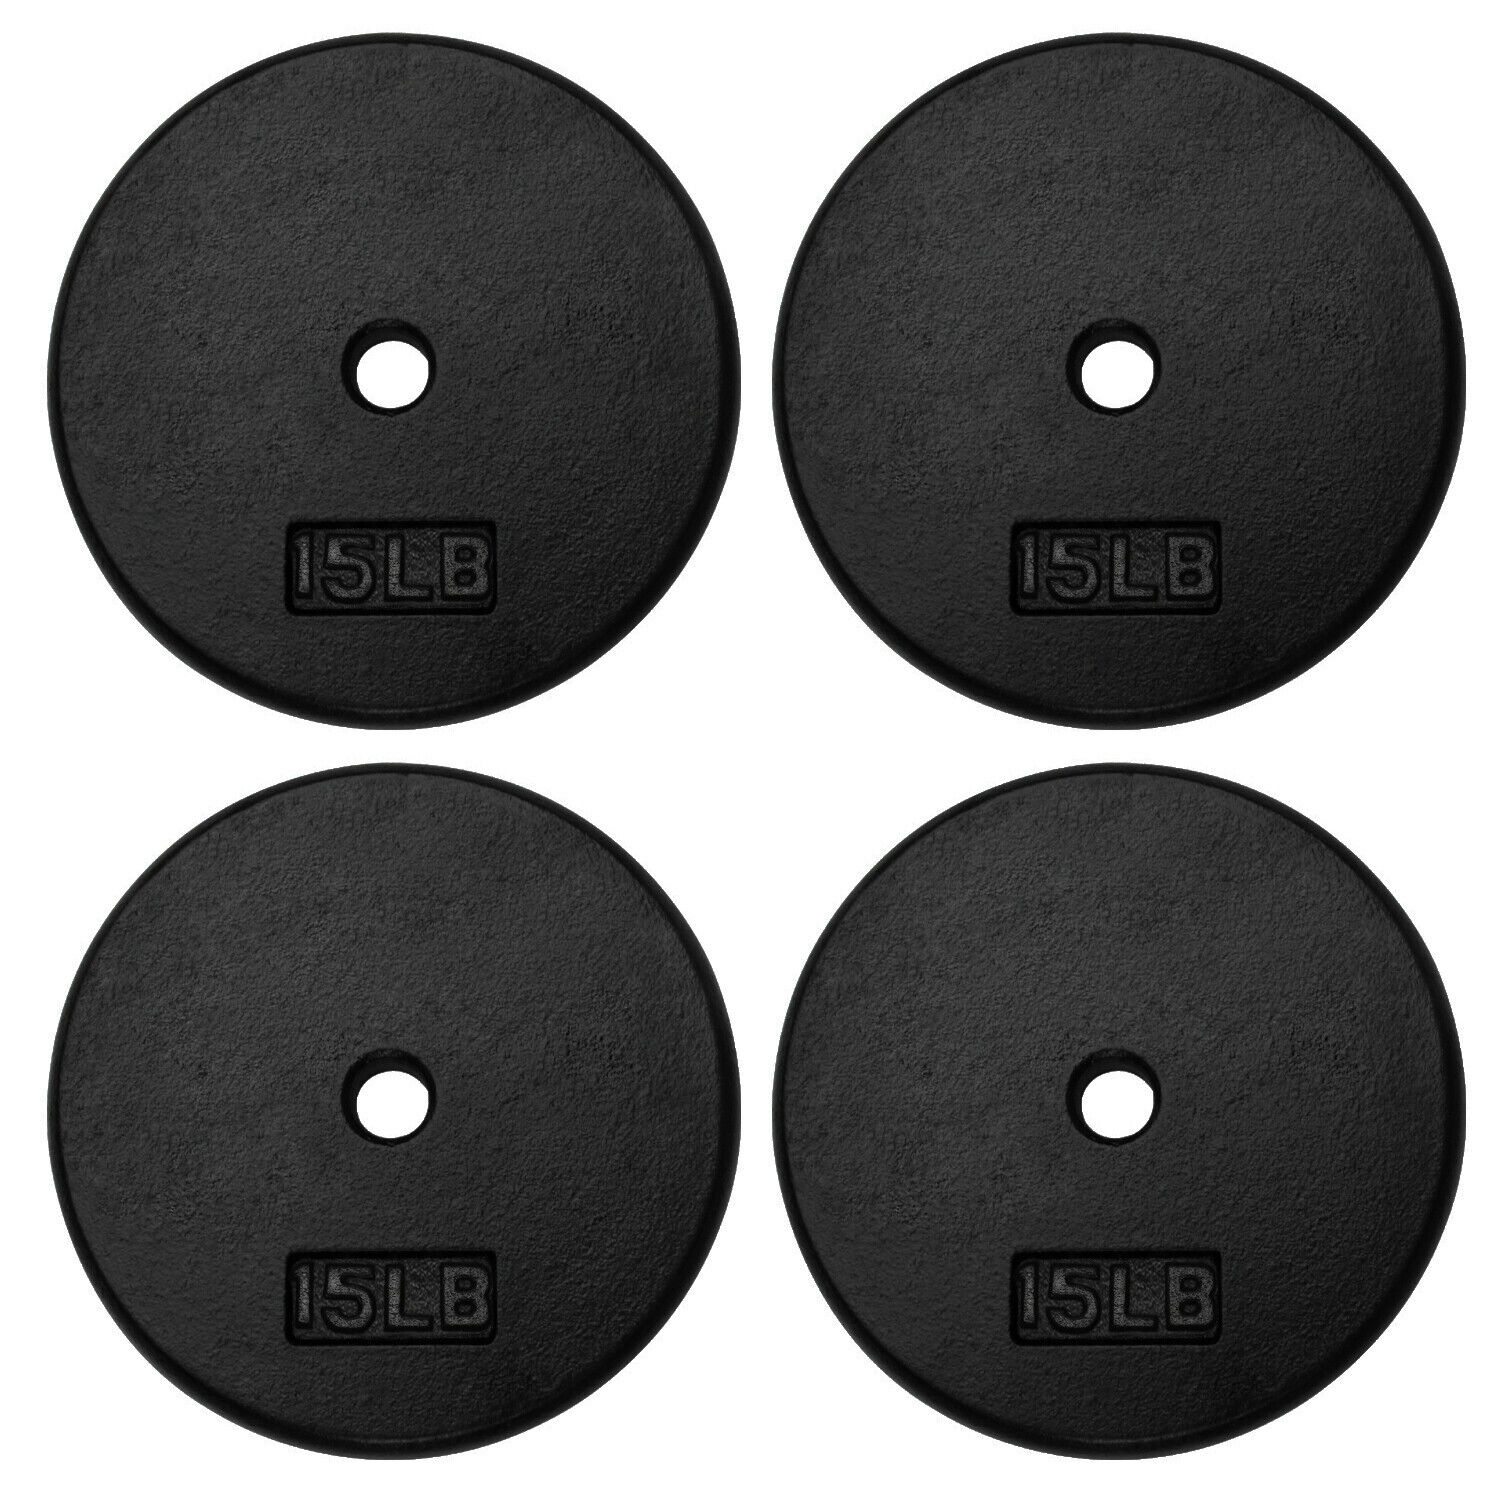 A2ZCARE Standard Cast Iron Weight Plates 1-Inch Center-Hole (15 lbs - Four)